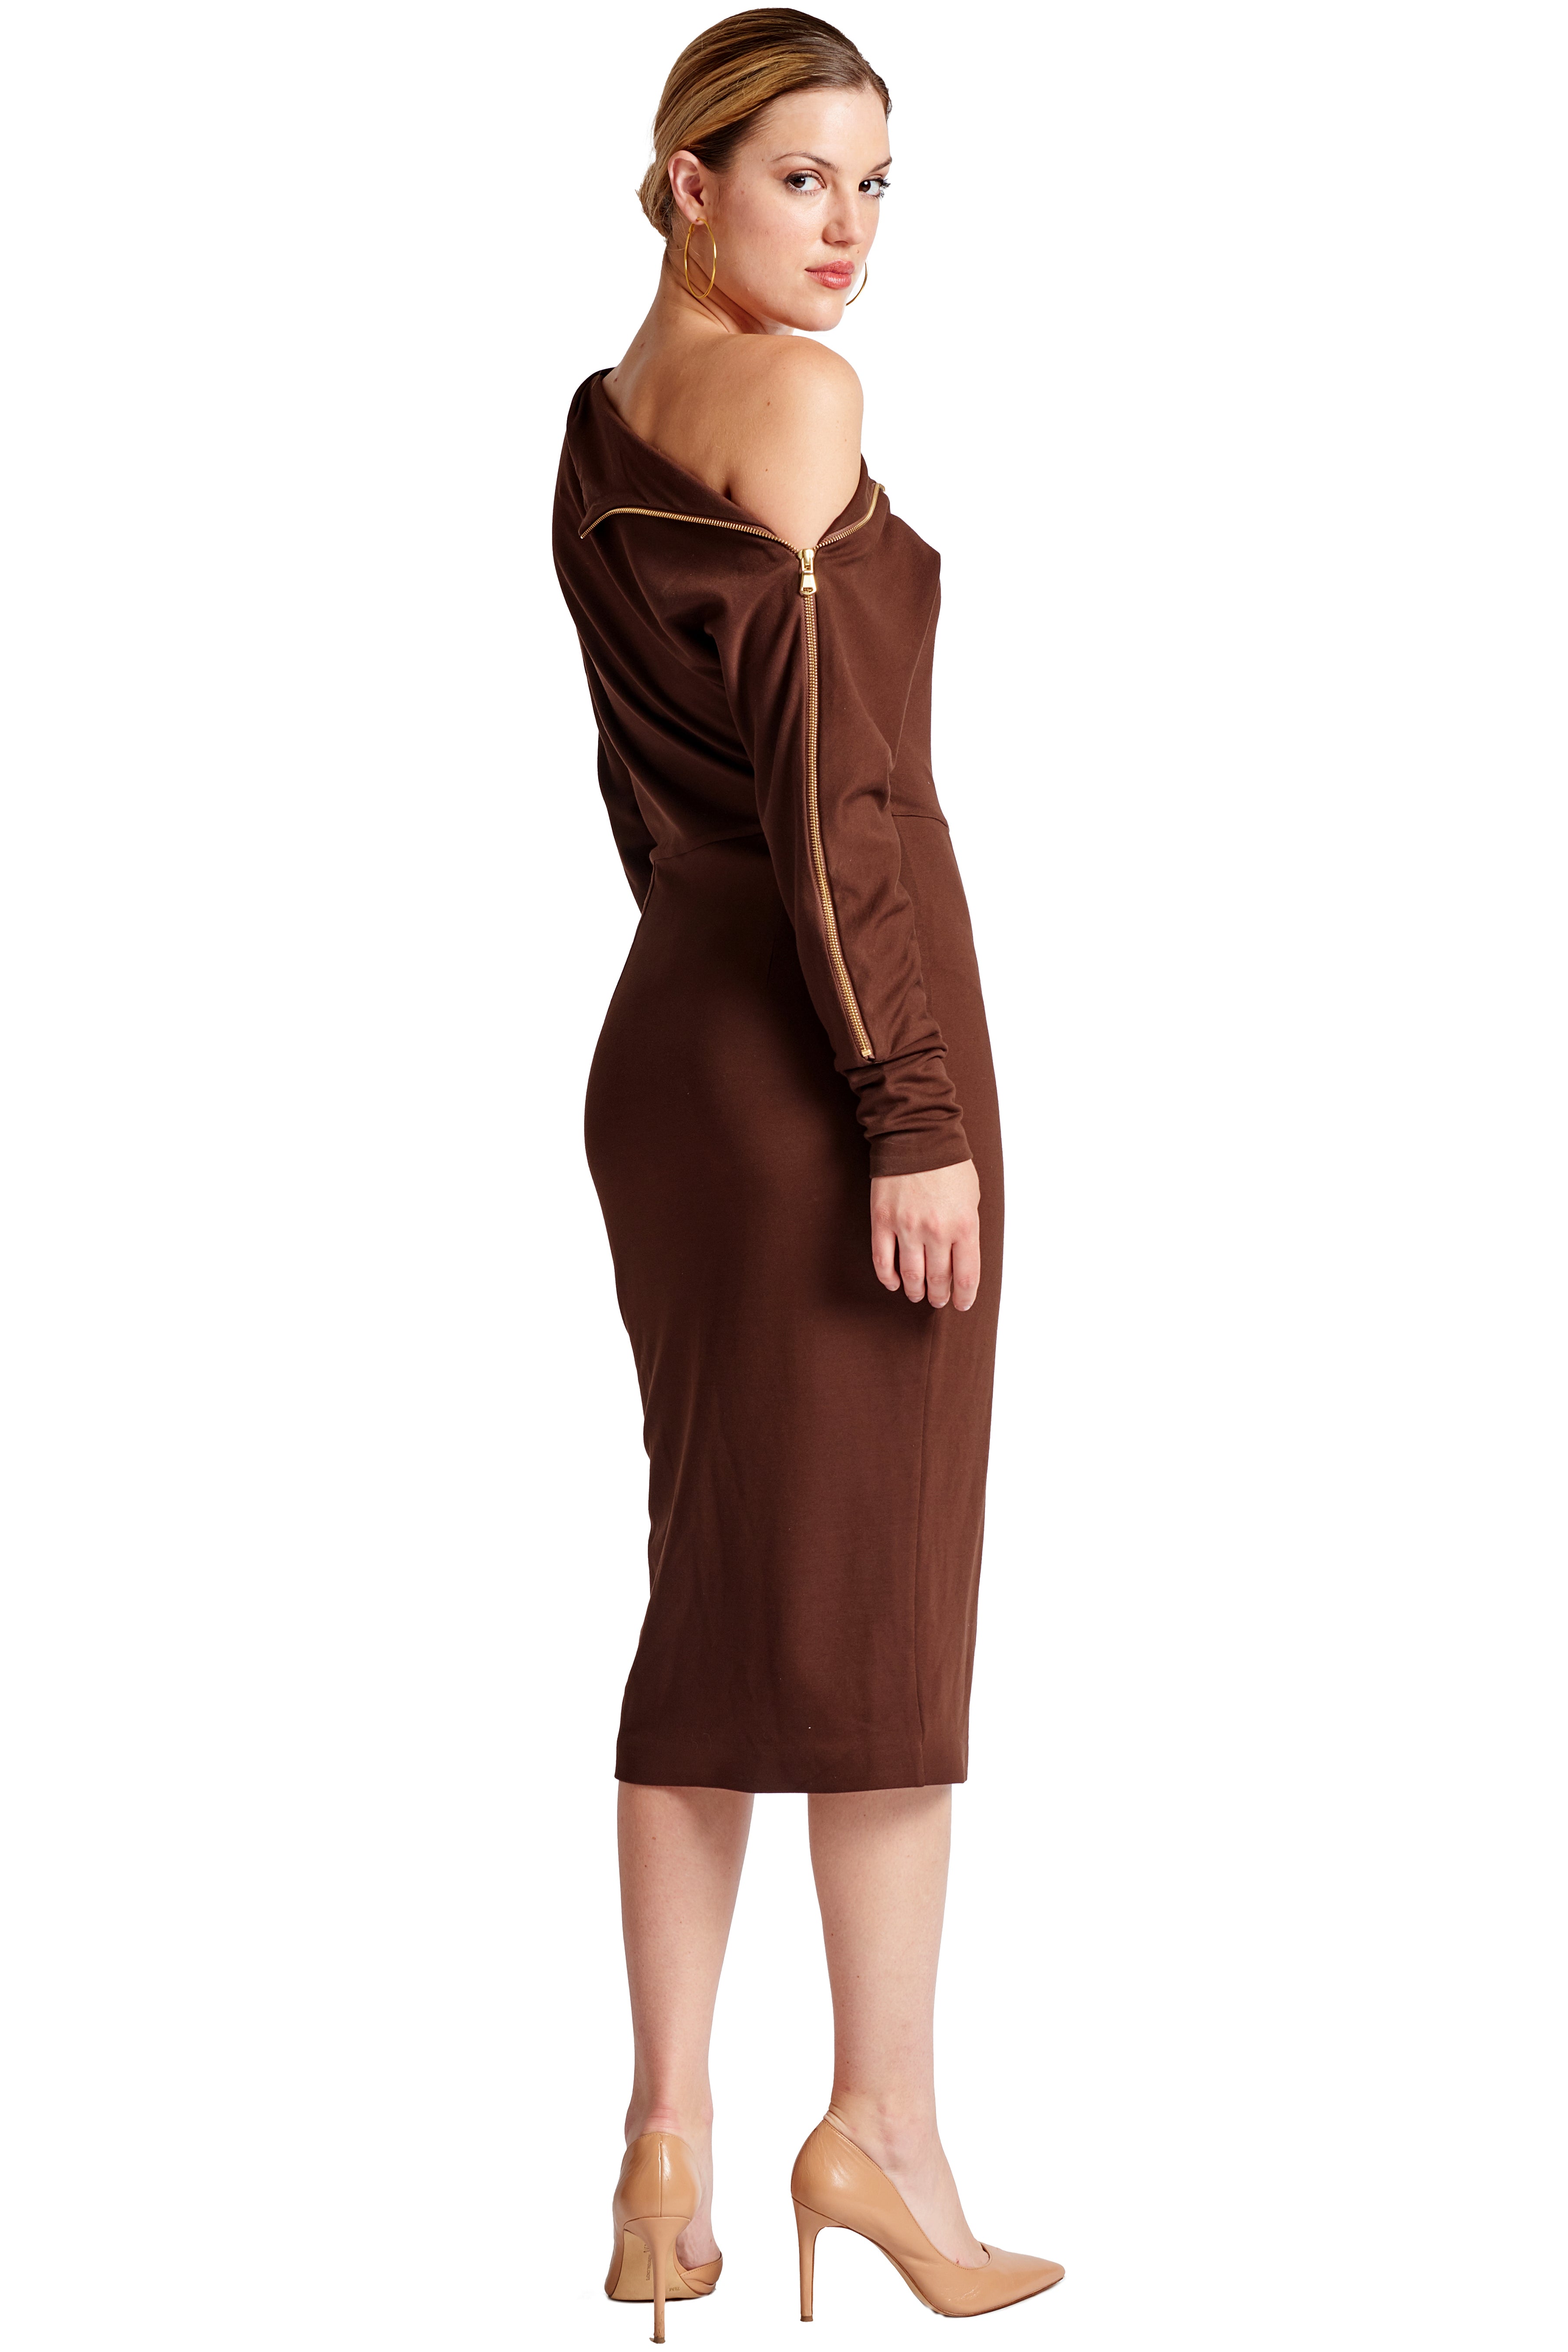 3/4 back view of model wearing the Simona Maghen Josefa Dress, chocolate brown long sleeve Ponte midi dress with zipper along the right shoulder and front skirt zipper slit.